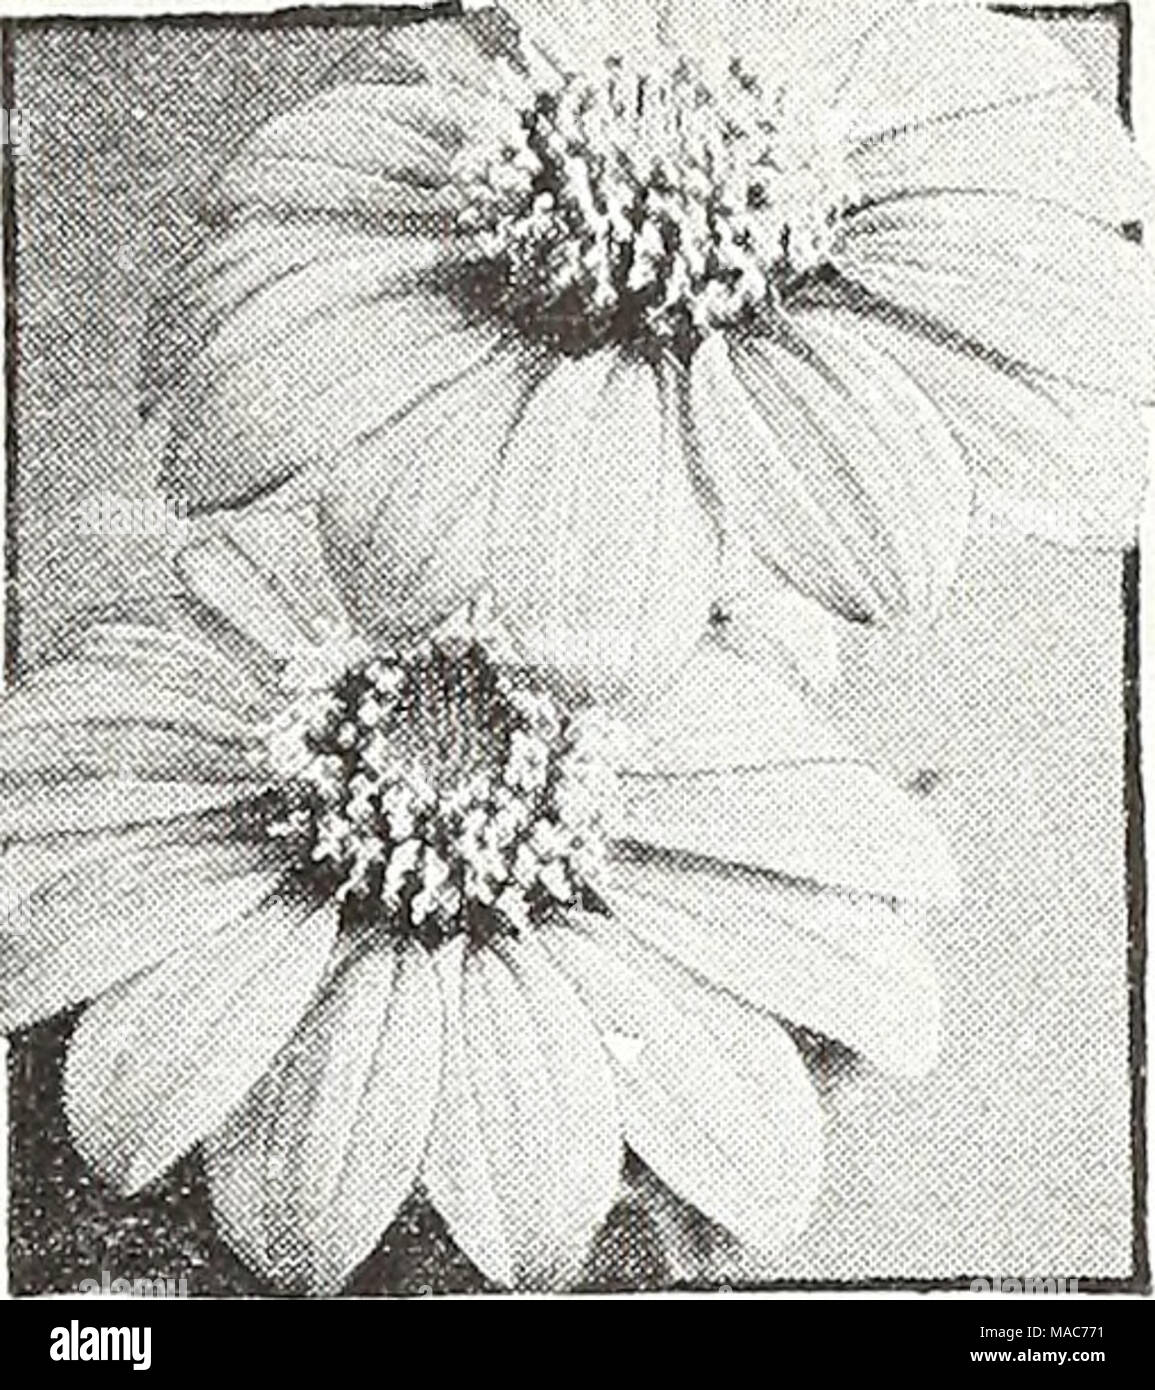 . Dreer's novelties and specialties for 1948 : three superb zinnias for every garden . Tithonia speclosa, Early-Flowering Tithonia speciosa ® Mexican Siuiflower Golden Flower of the Ineas 4288 Avalon Earliest Hybrids Mixed. Stately plants, 6 ft. high, carrying during the autumn showy long- stemmed blooms ranging from orange topaz to burnished scarlet- flame. Pkt. 25c; large pkt. 75c. 4289 Early-Flowering. Intensely bril- liant, golden-orange flowers borne profusely on stately 6-ft. plants during the fall. The large blooms are not unlike single Zinnias. Pkt. 15c; large pkt. 40c. Stock Photo